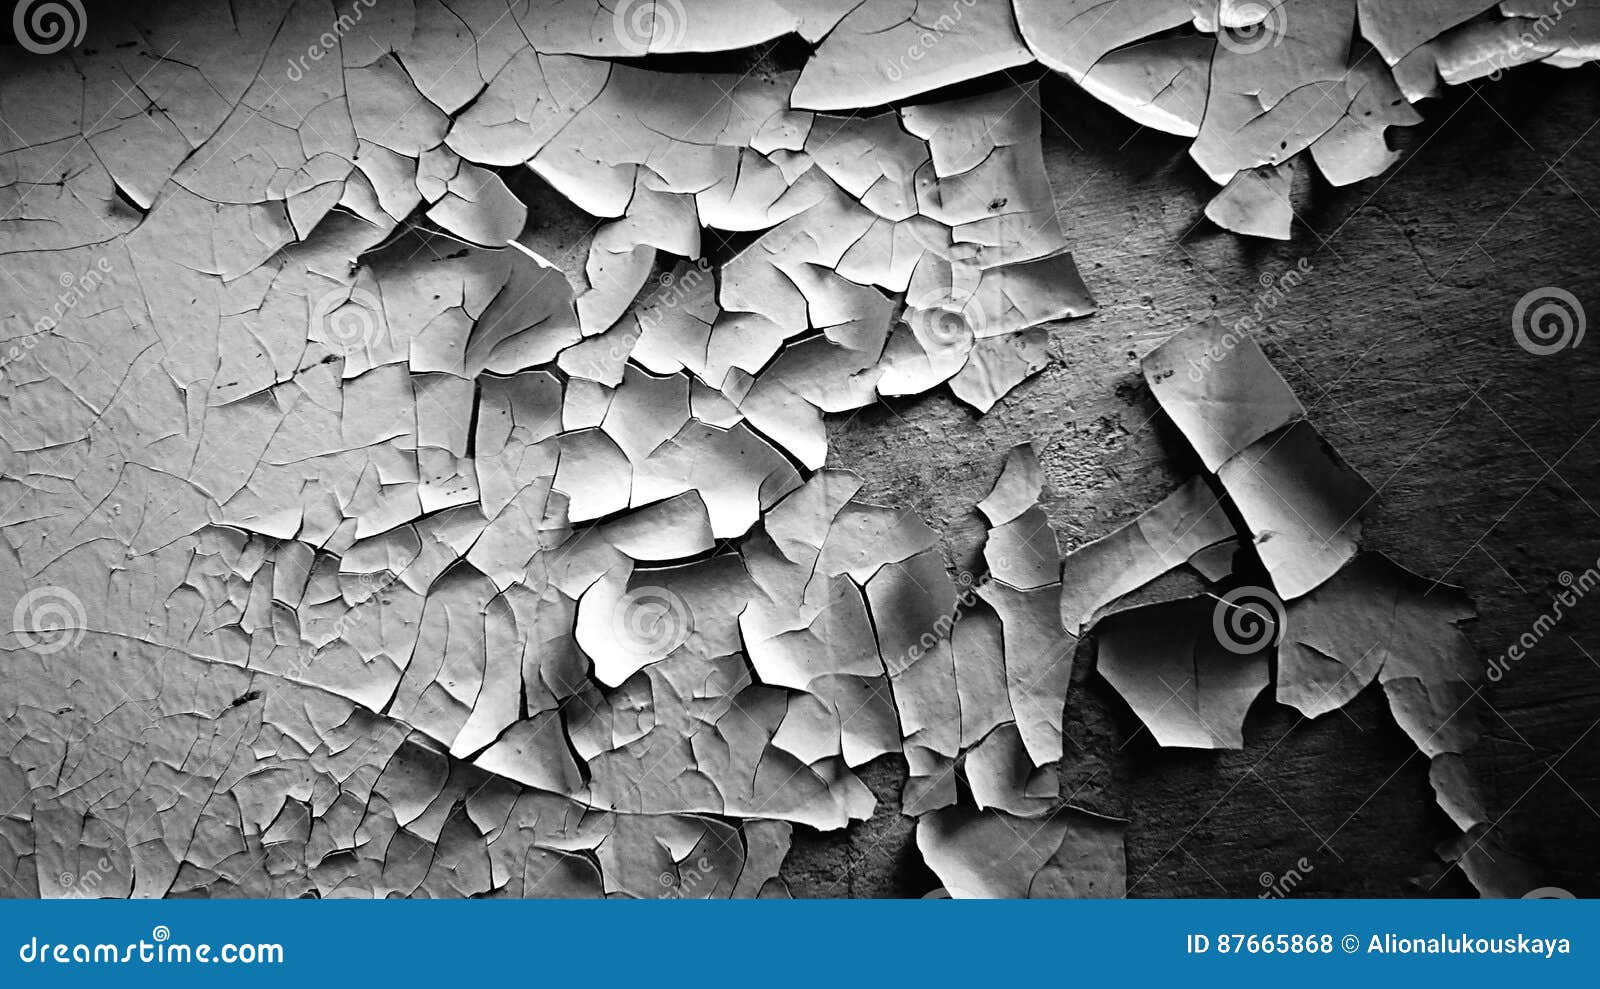 background is a texture, peeling paint on an old wall. black and white